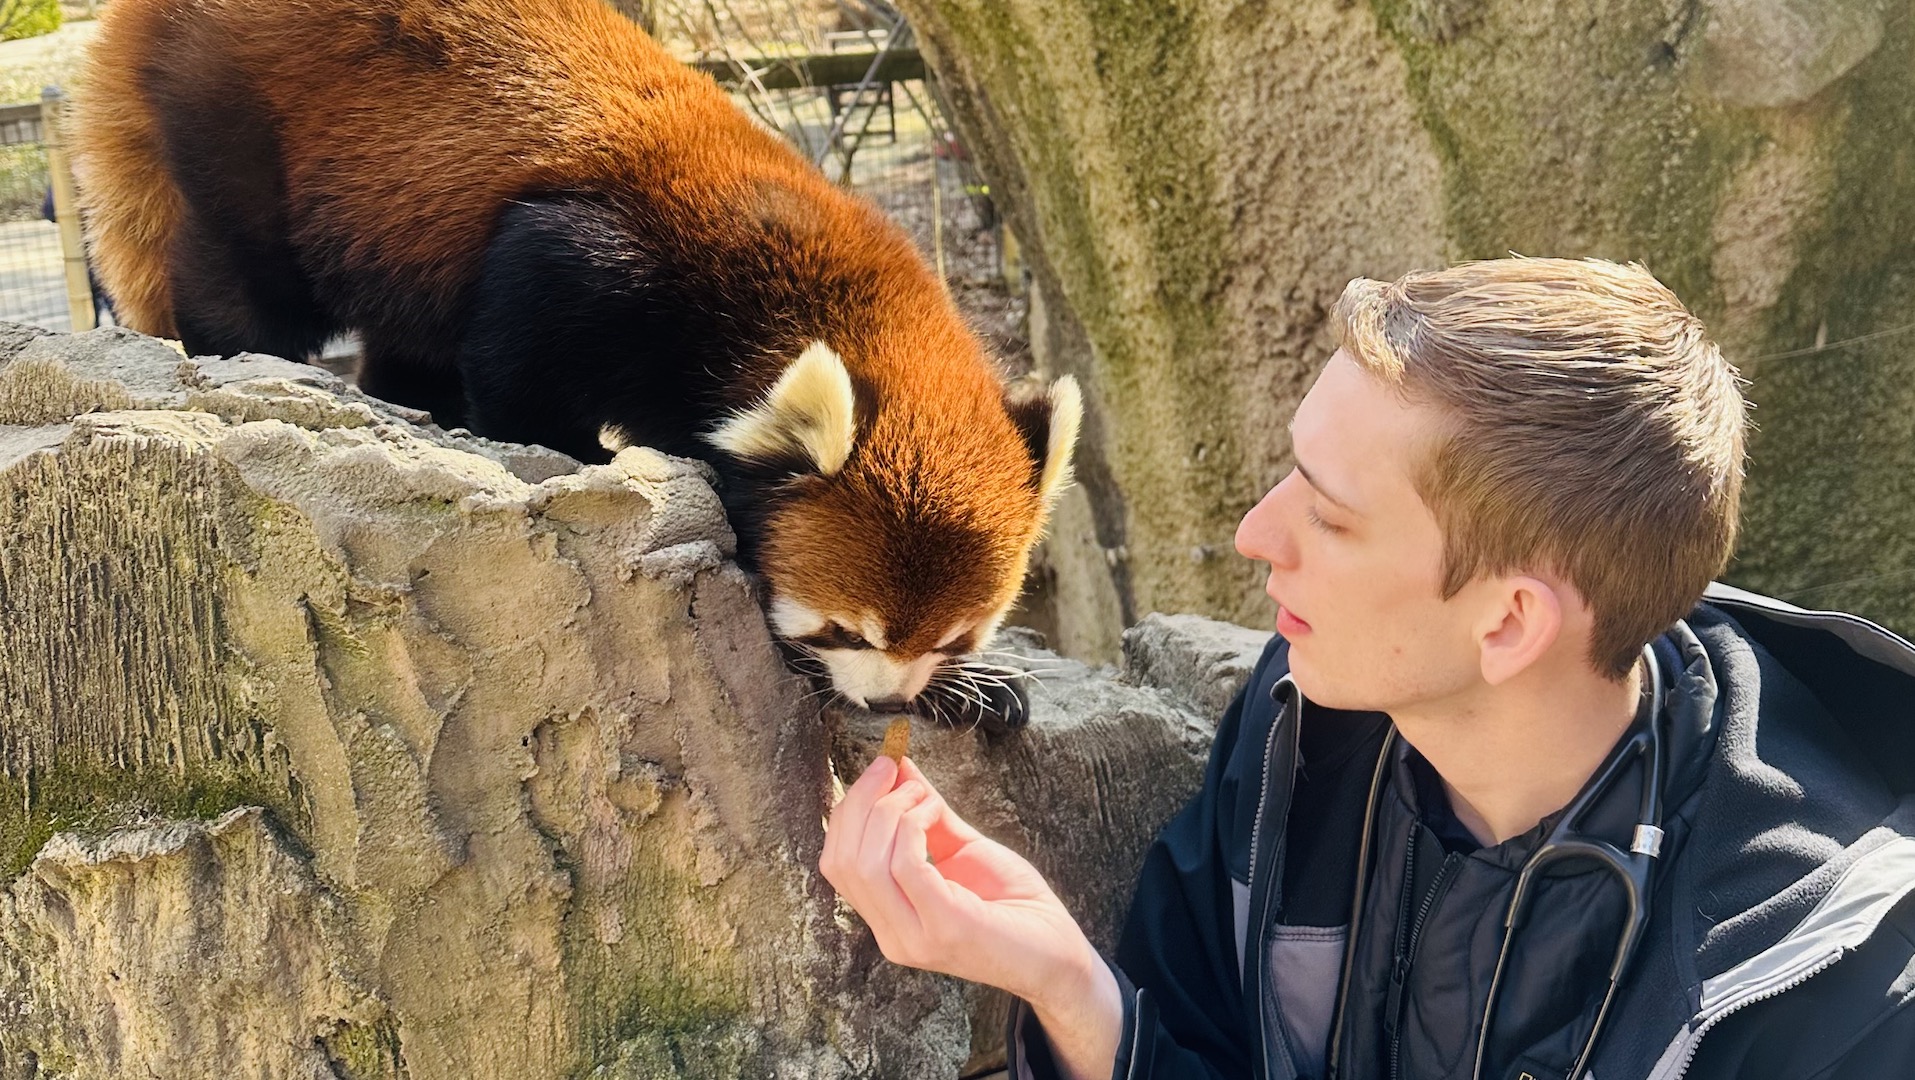 Christian Capobianco worked with red pandas during an externship